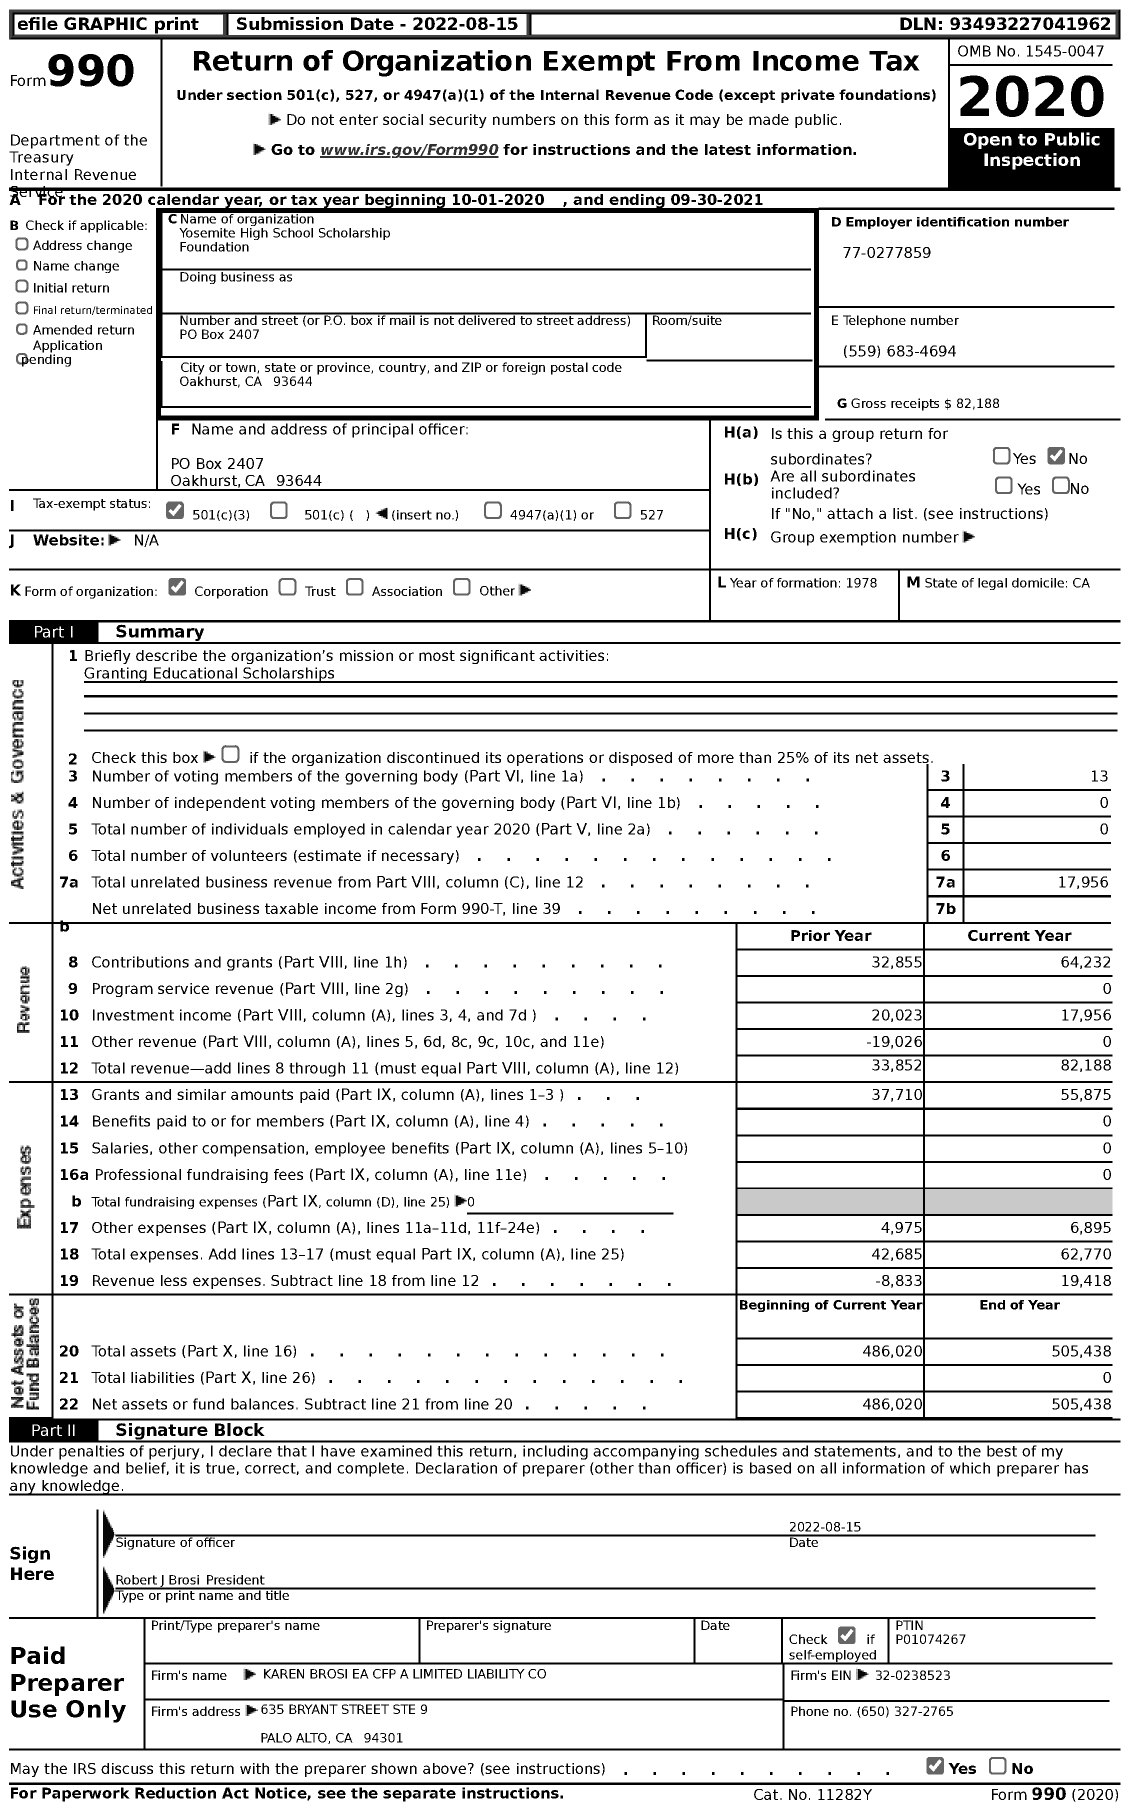 Image of first page of 2020 Form 990 for Yosemite High School Scholarship Foundation